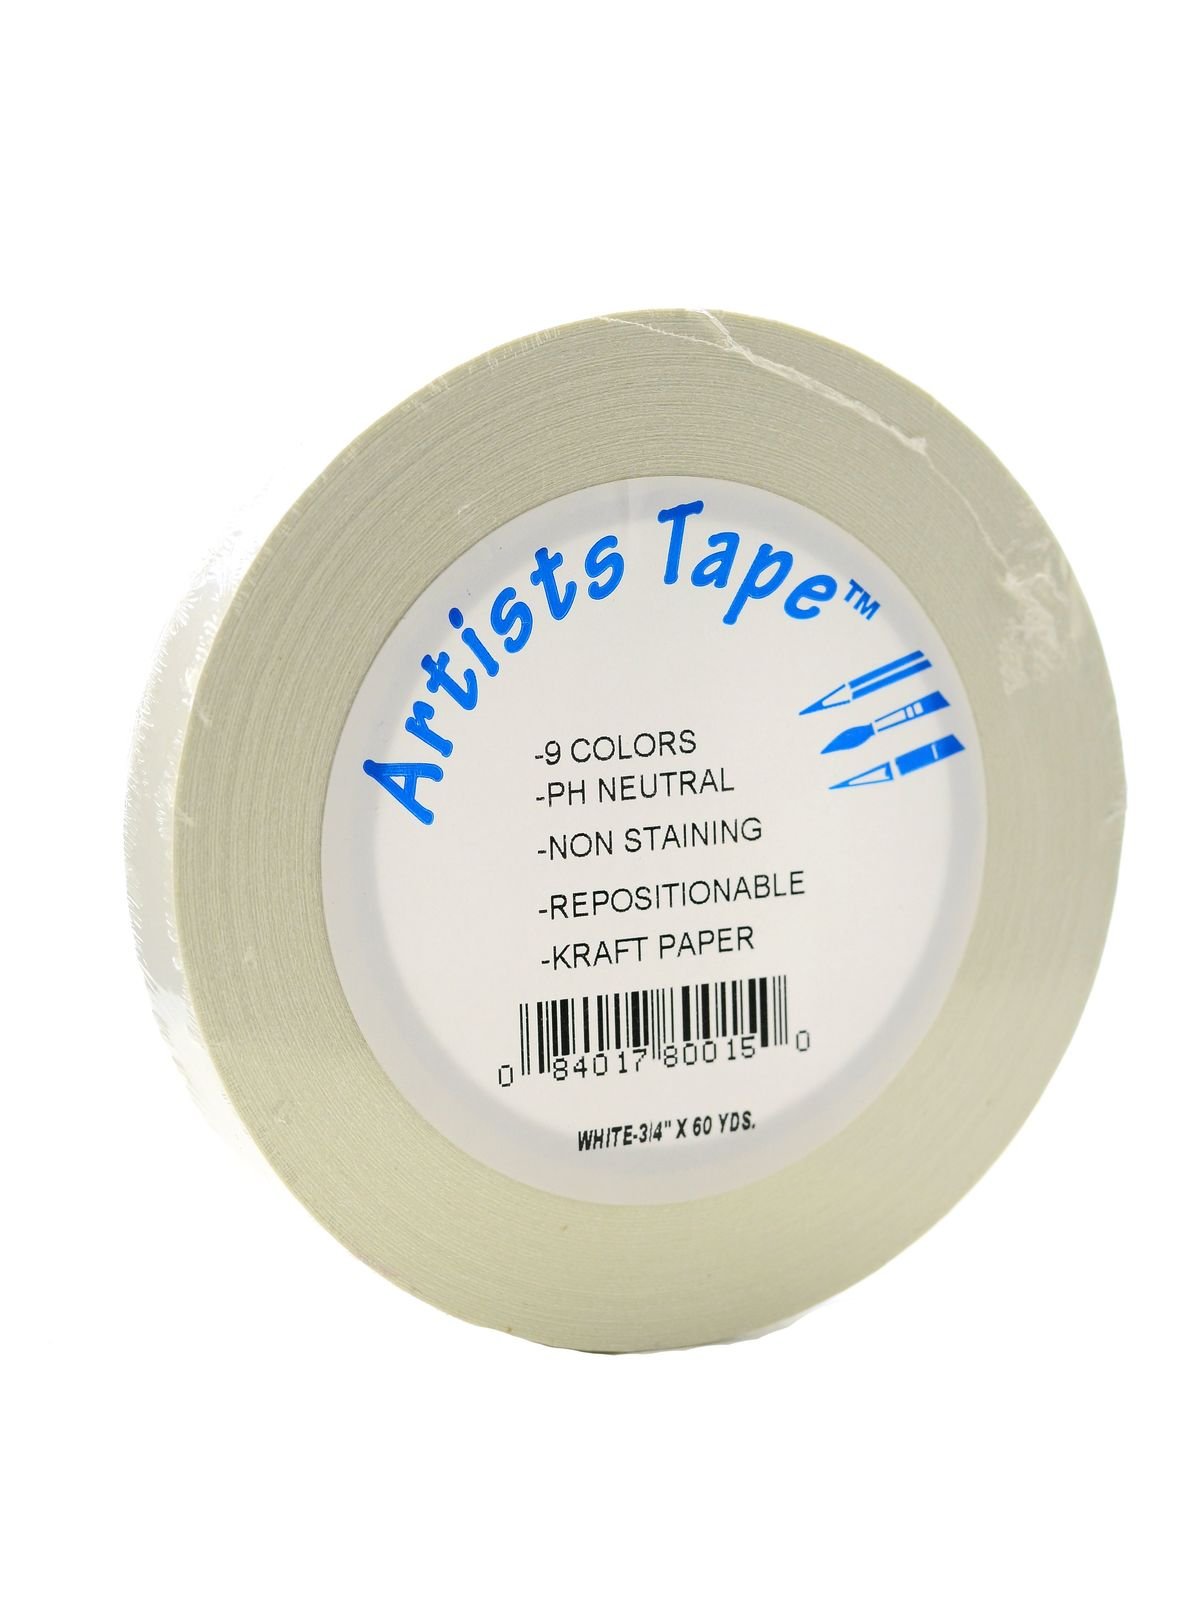 3 Pack Artist Tape White Artists Tape Masking for Drafting Art Watercolor  Painting Canvas Framing - Acid Free .6 Inch 540 FT Total : :  Home & Kitchen